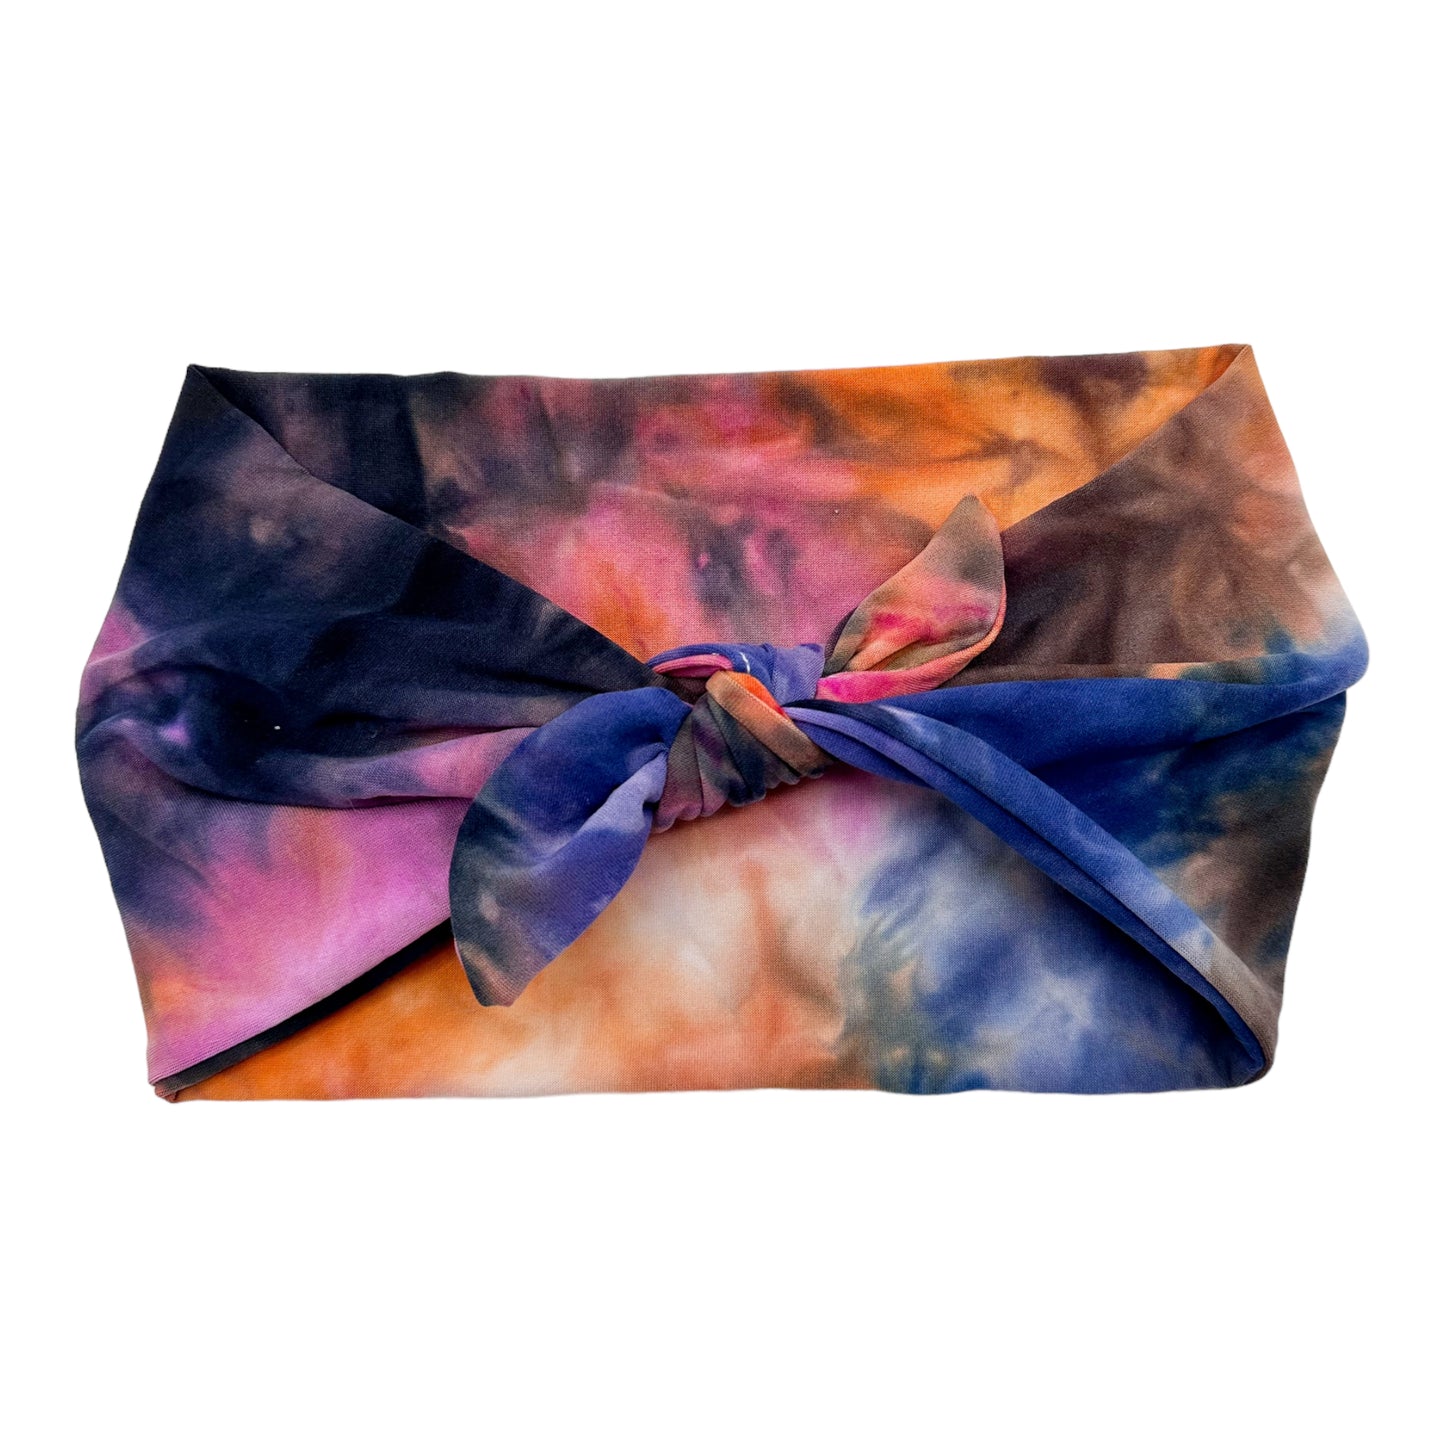 COULD BE HALLOWEEN TIE-DYE - LUXE